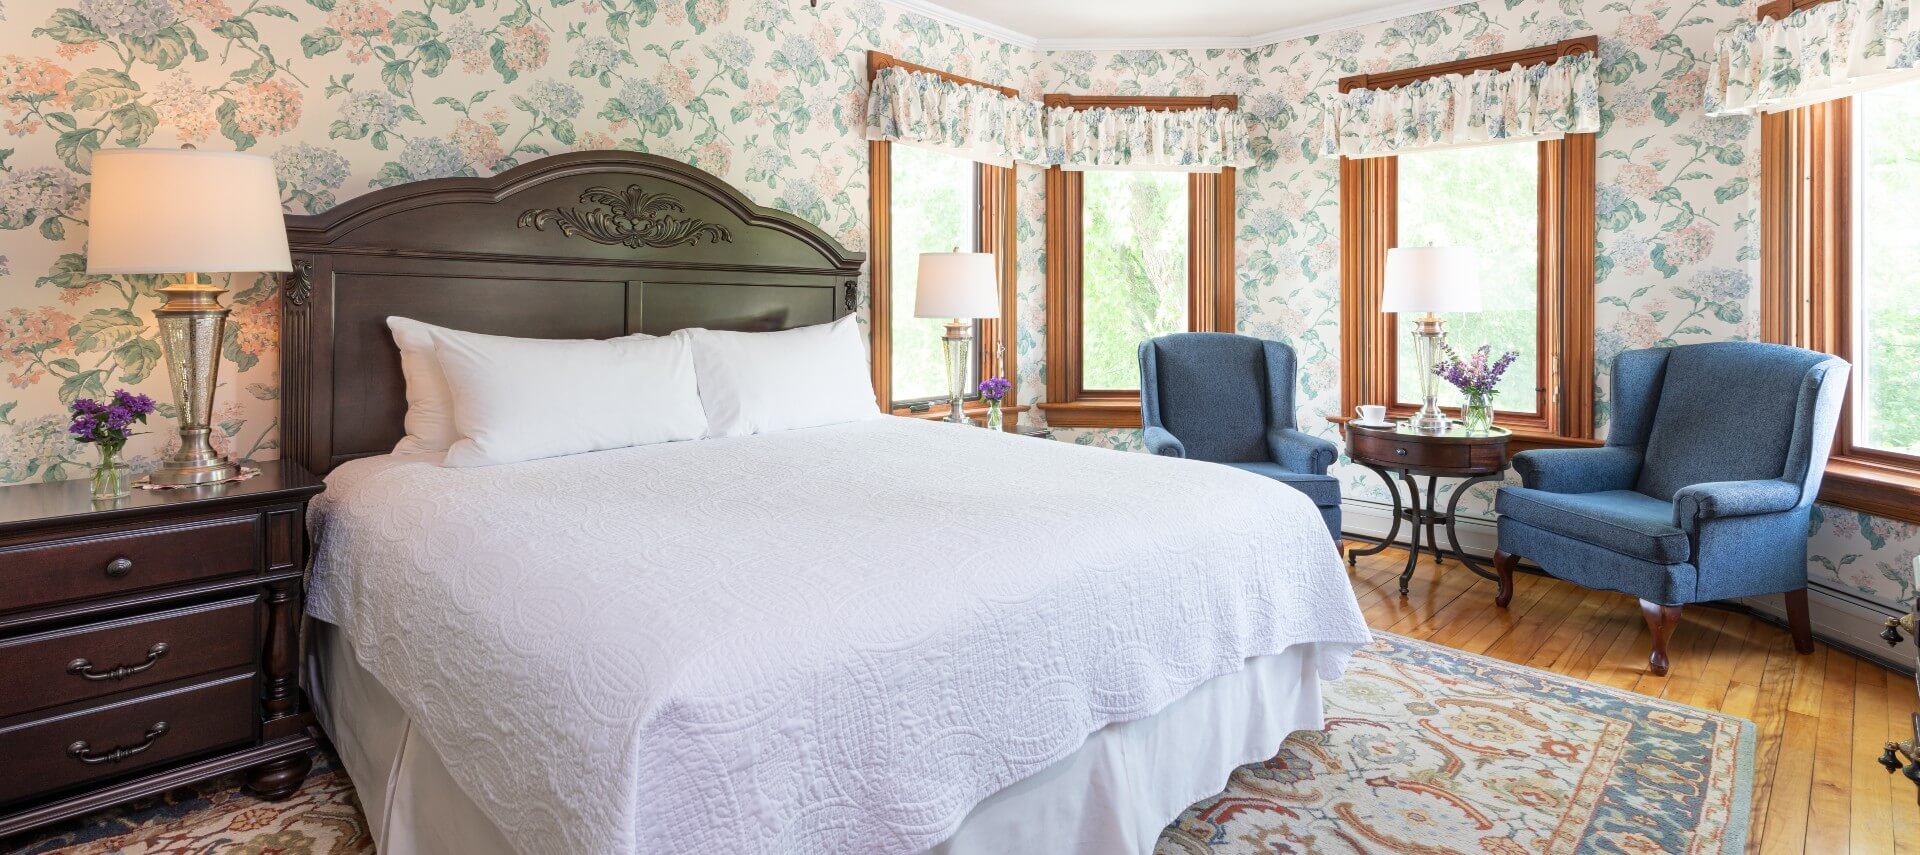 Large bedroom with king bed in white, blue wingback chairs by large windows and floral wallpaper and valences